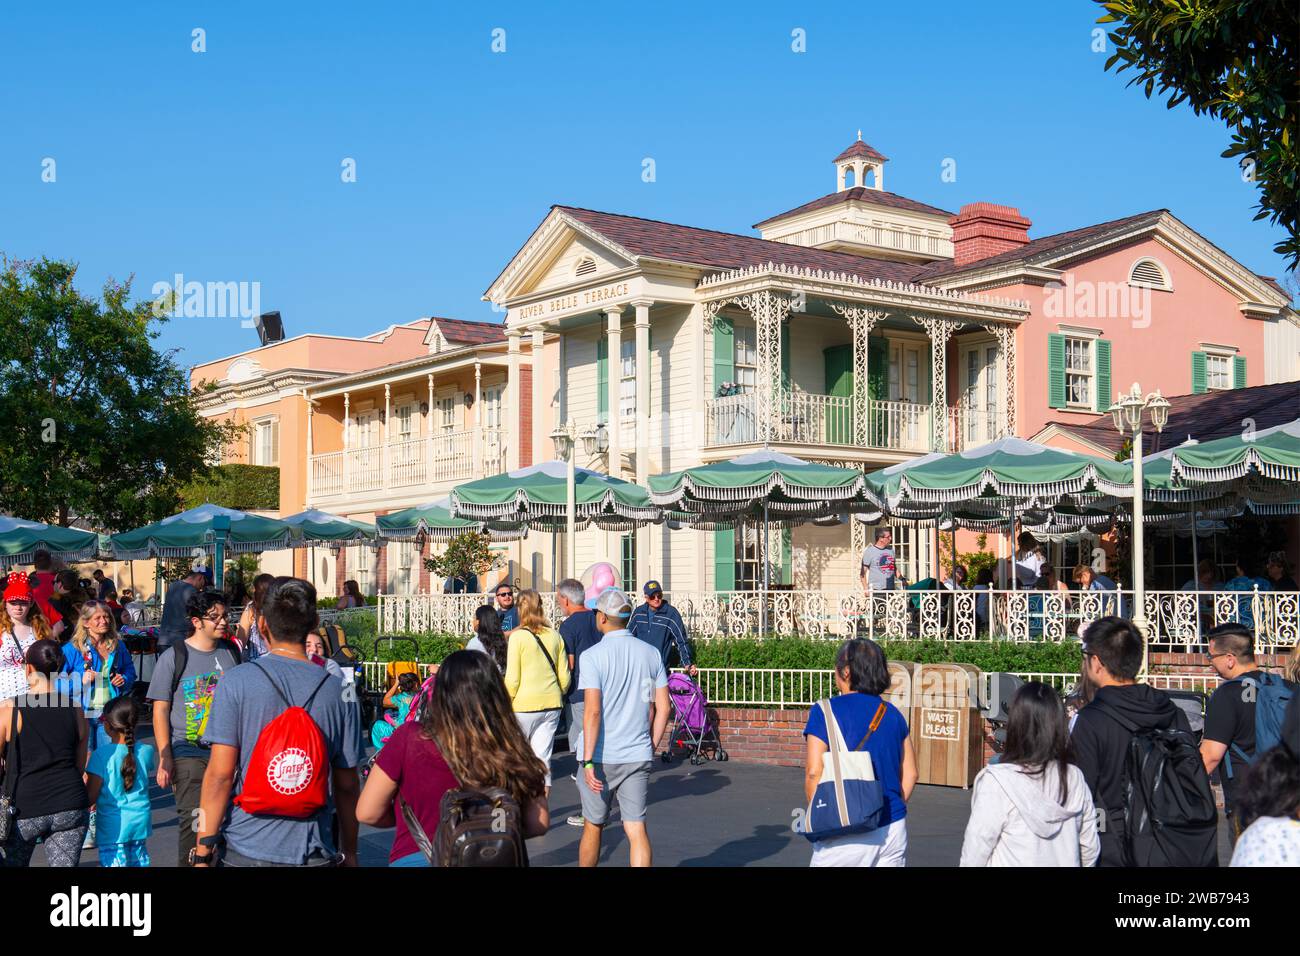 River Belle Terrace restaurant at New Orleans Square in Disneyland Park in Anaheim, California CA, USA. Stock Photo